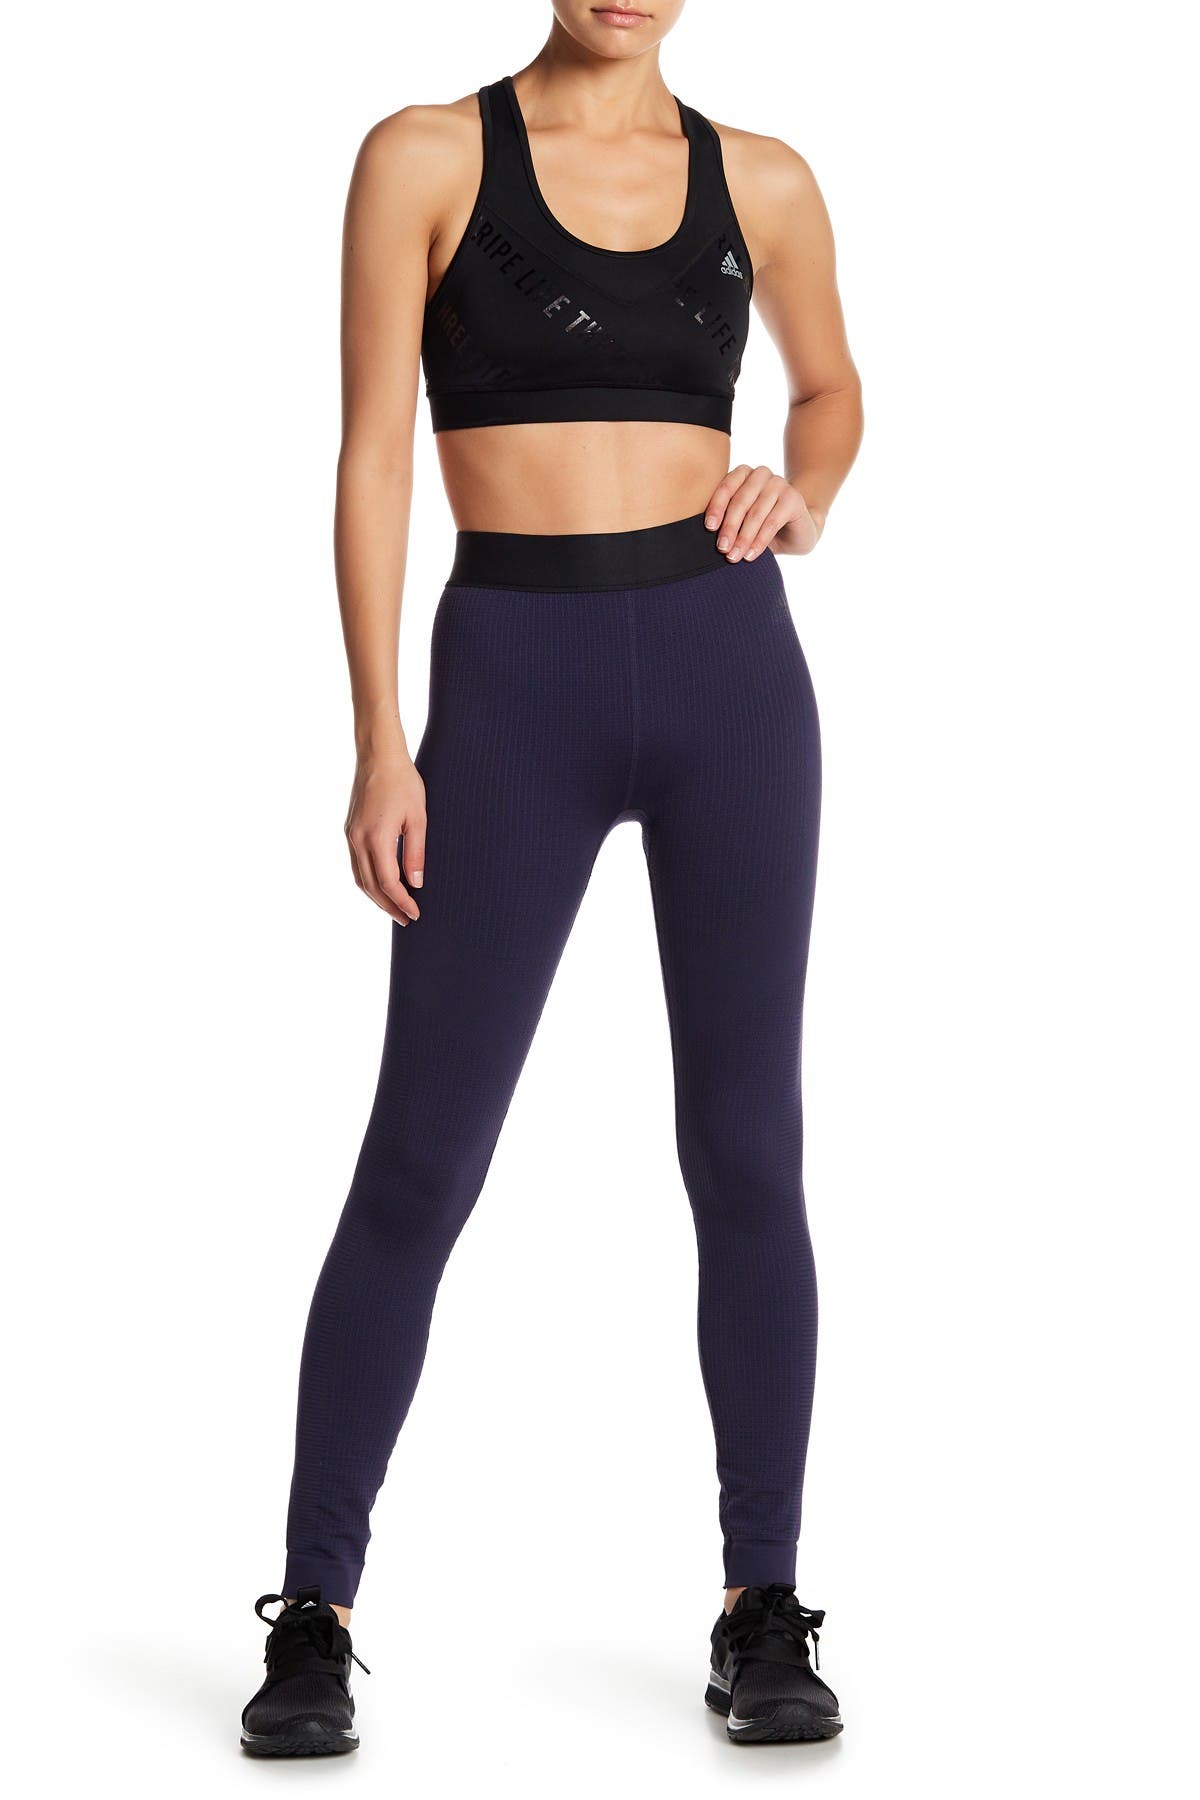 adidas | Climaheat Tights | Nordstrom Rack